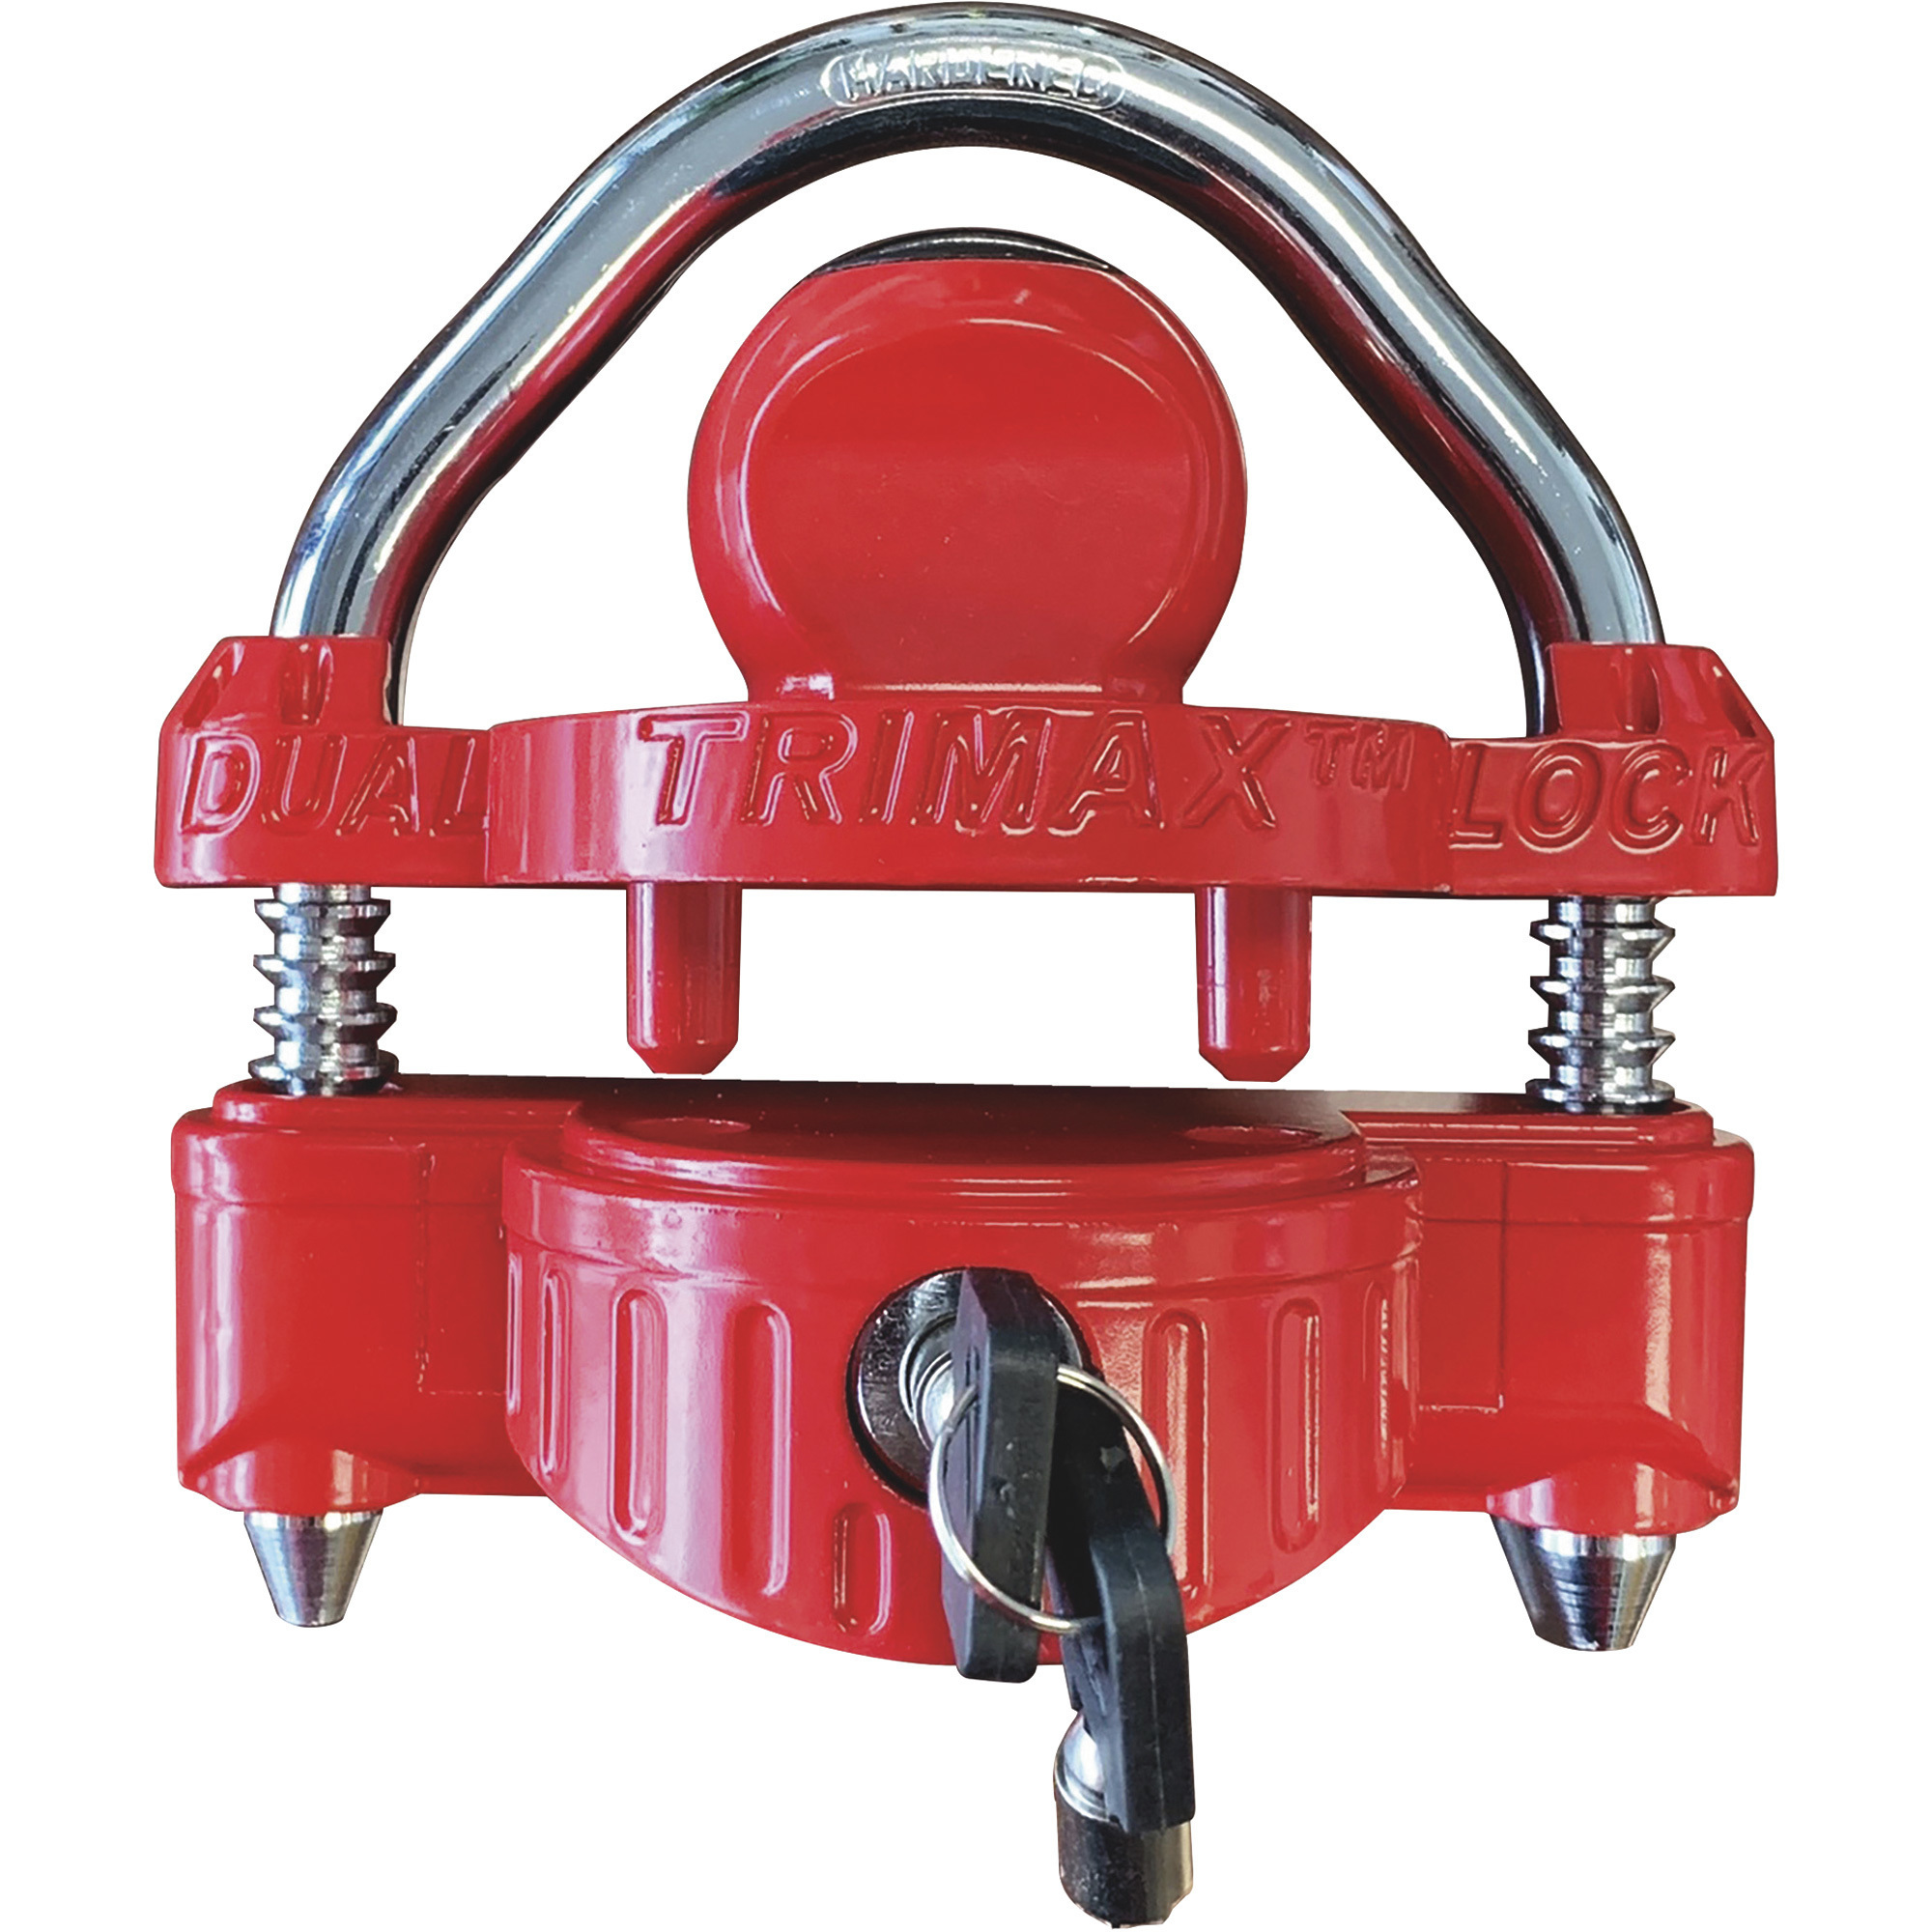 Trimax Universal Narrow Body 1/2Inch Steel Shackle Dual Coupler Lock with an Integrated U-Lock Feature, Model UMAX25D